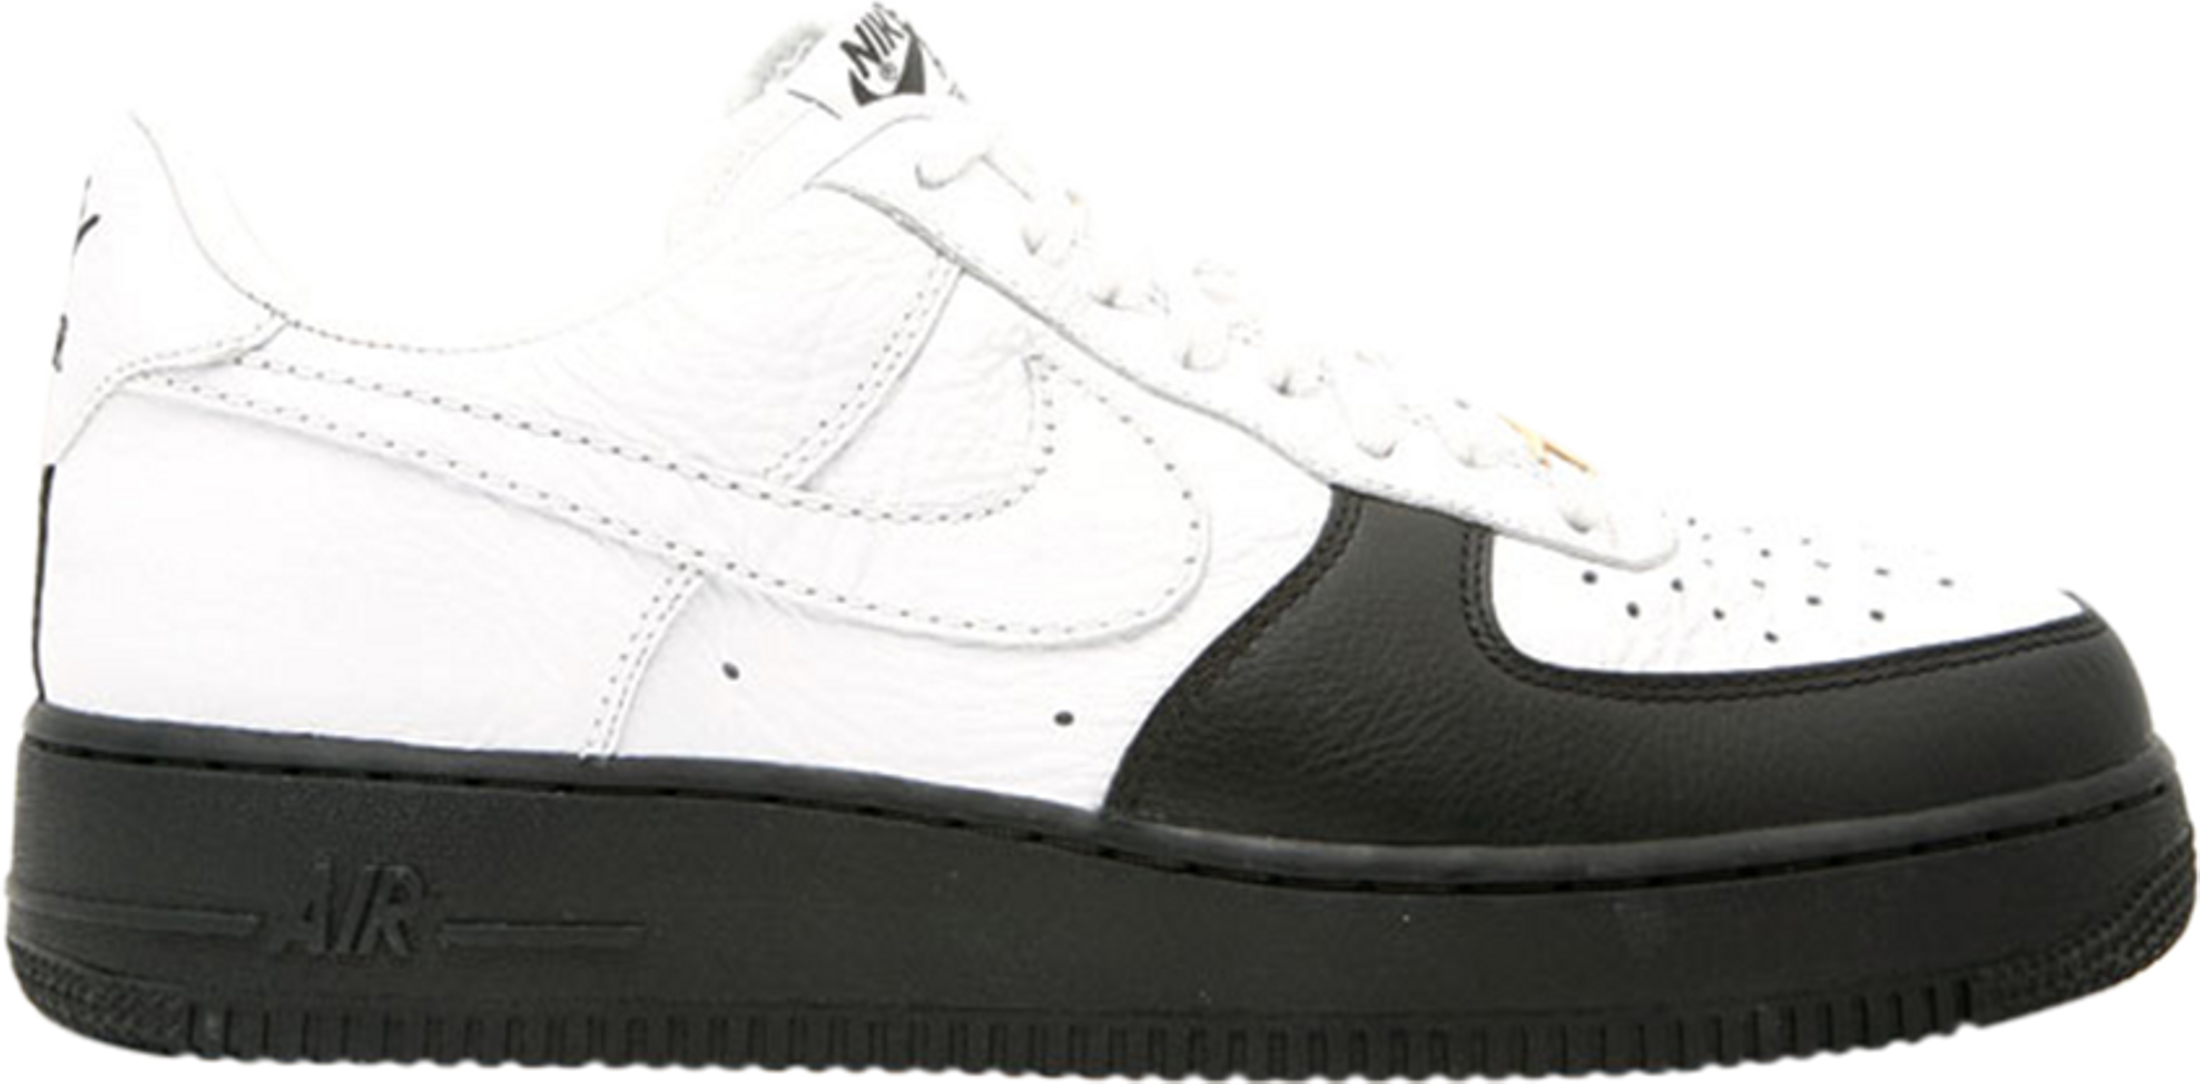 Nike Air Force 1 Low Taxi